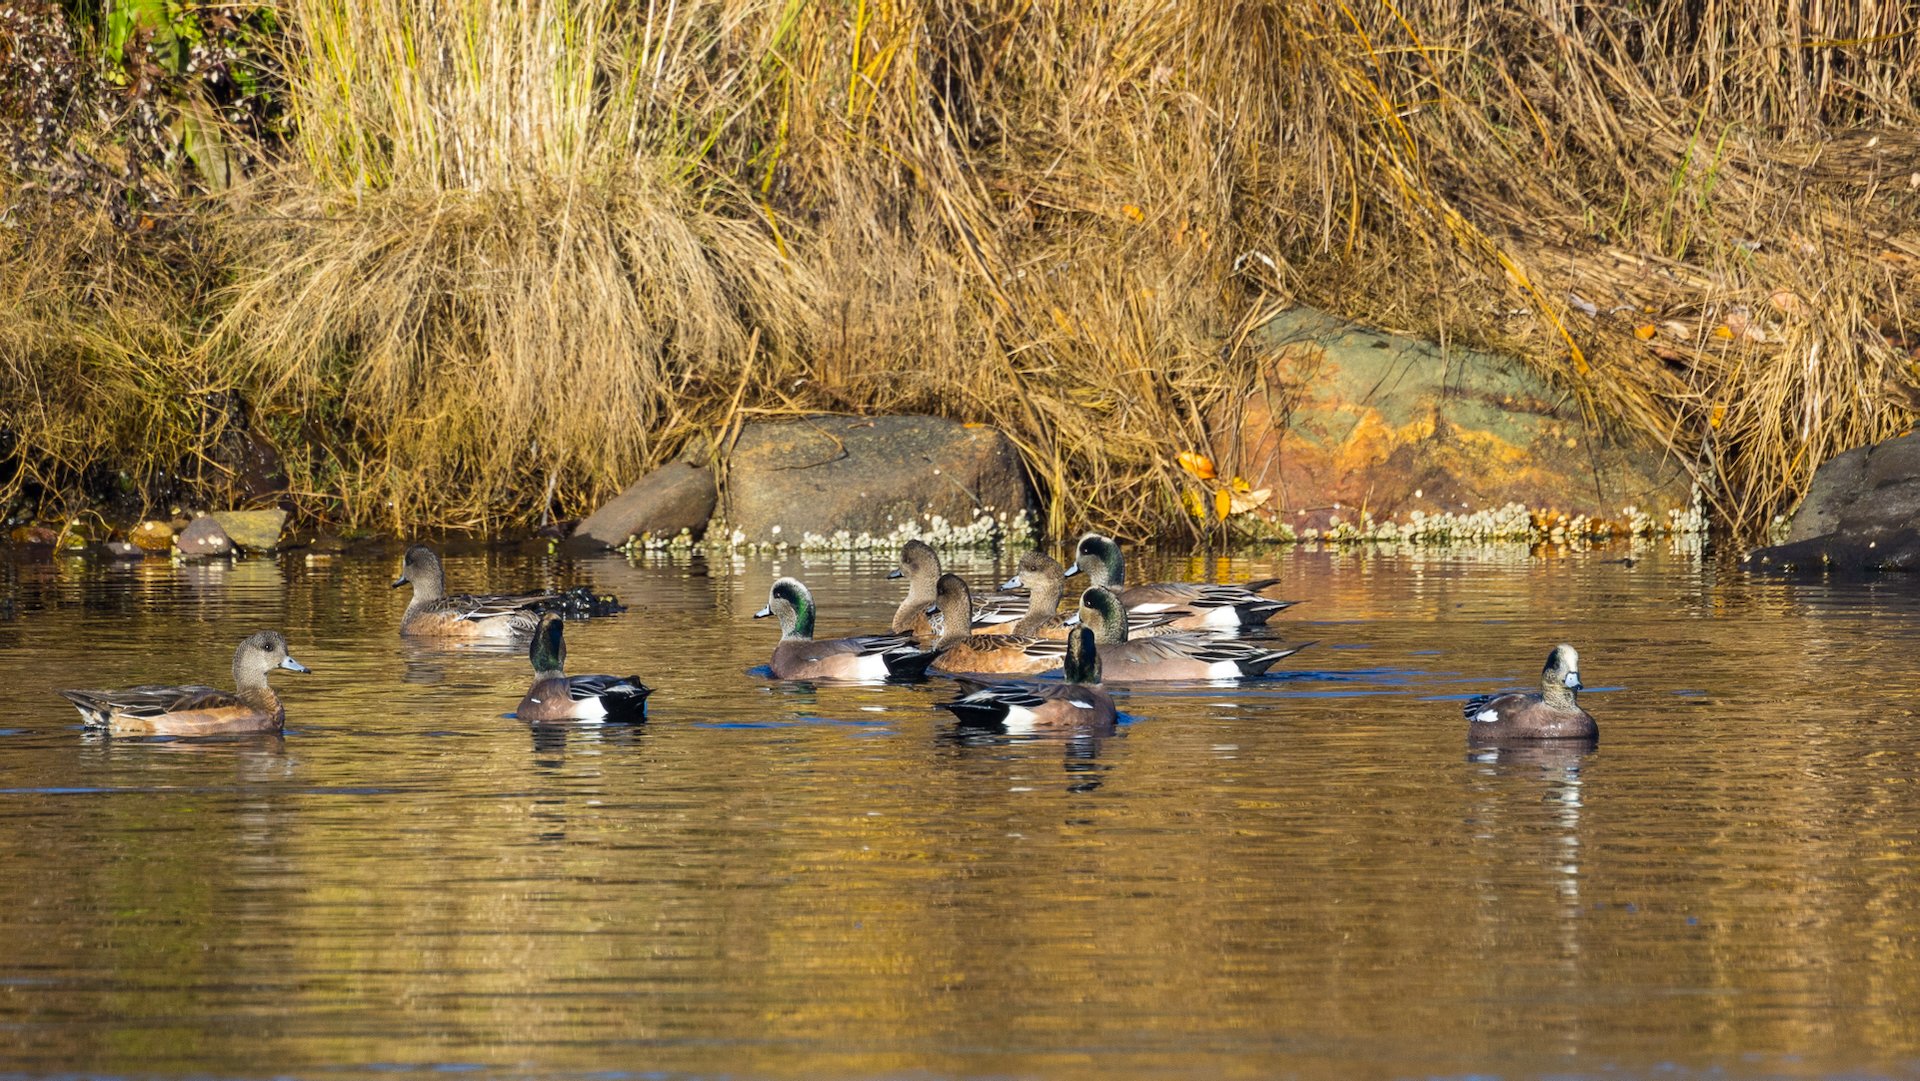  There were lots of ducks in the freshwater part of the lagoon. These are mostly Ameridan Widgeons.  